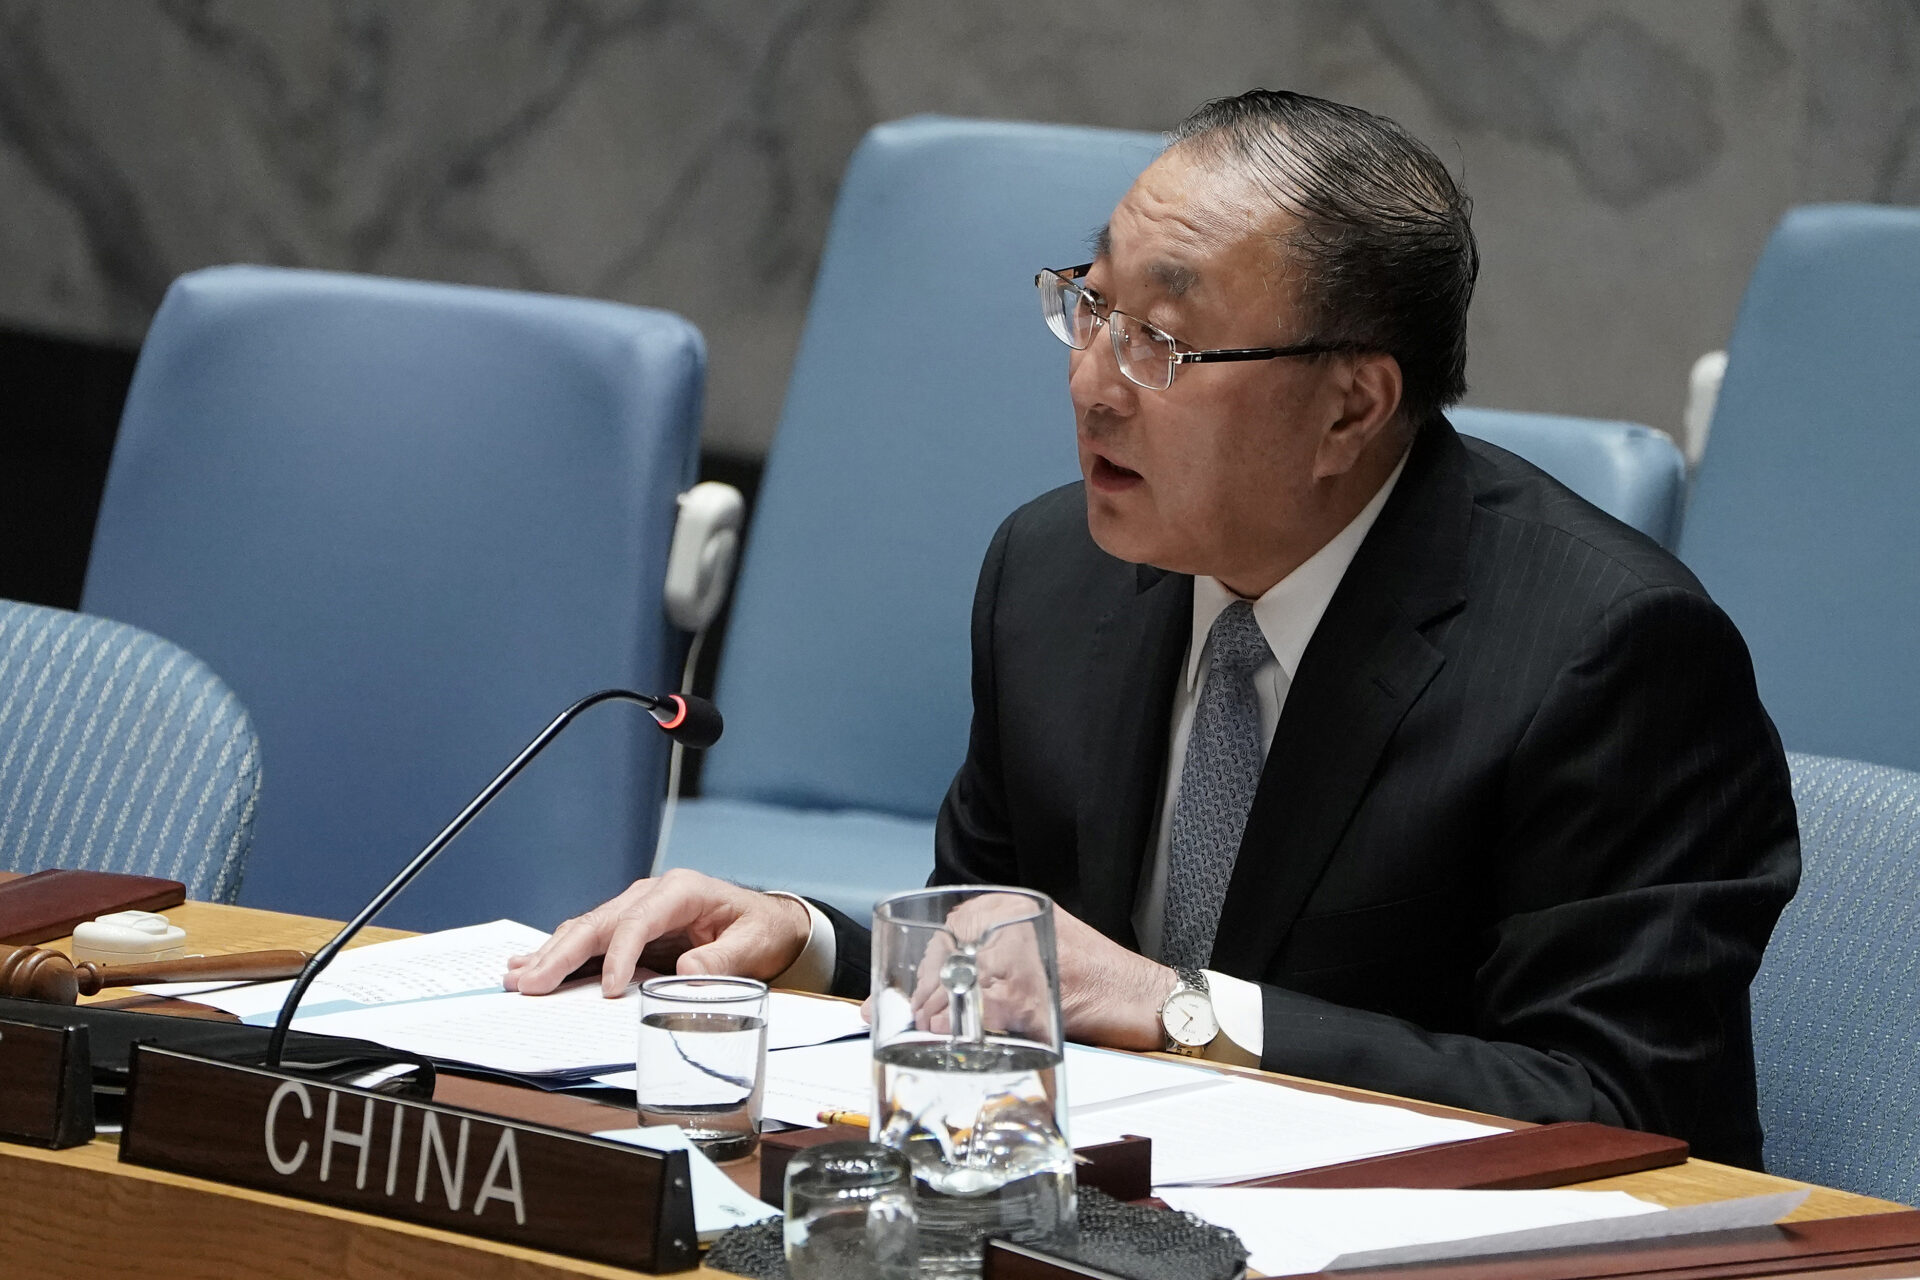 Zhang Jun, China's representative to the Security Council: We must resort to diplomatic settlement China's representative to the UN Security Council Zhang Jun said today (Friday) that diplomatic settlement should be resorted to and not escalate, adding: "The concerns of Russia and Ukraine should be taken into account while resolving the crisis."  "We hope to provide protection for civilians in Ukraine," Zhang Jun added, calling on all parties to be careful about nuclear facilities in Ukraine, according to Al-Arabiya TV.